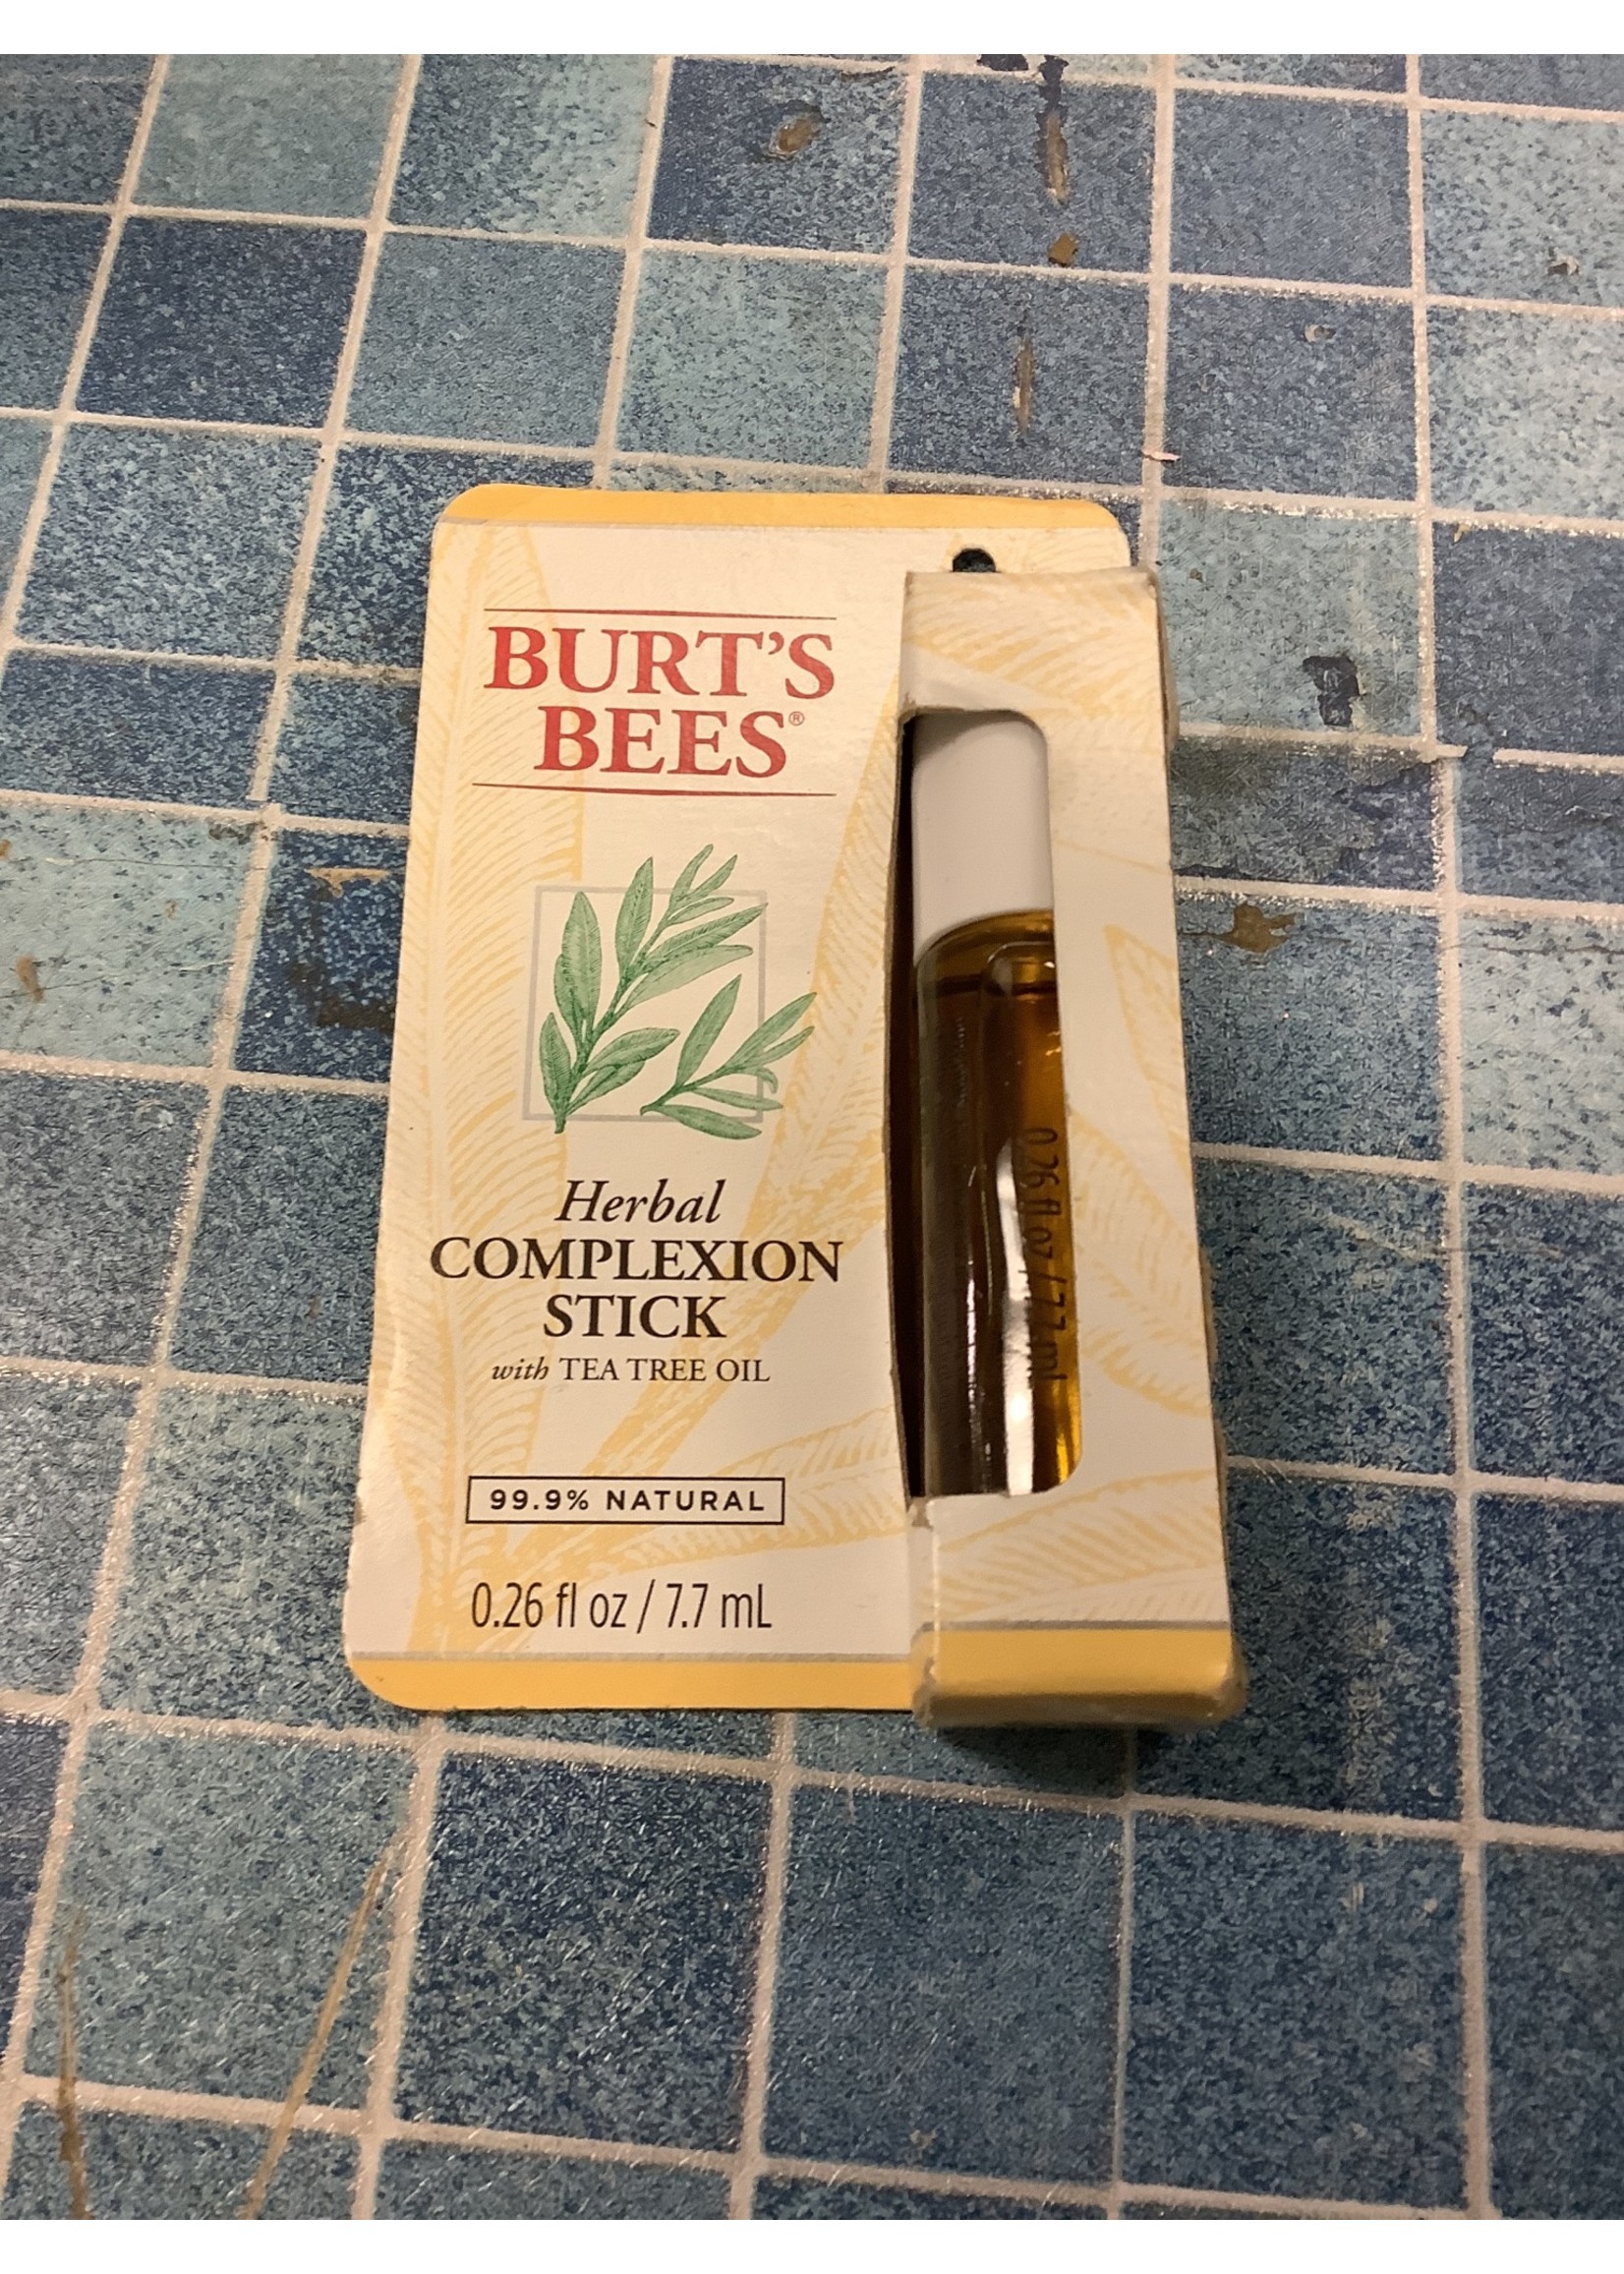 Lao Goed doen stijl Burt?s Bees Herbal Complexion Stick With Tea Tree Oil - D3 Surplus Outlet